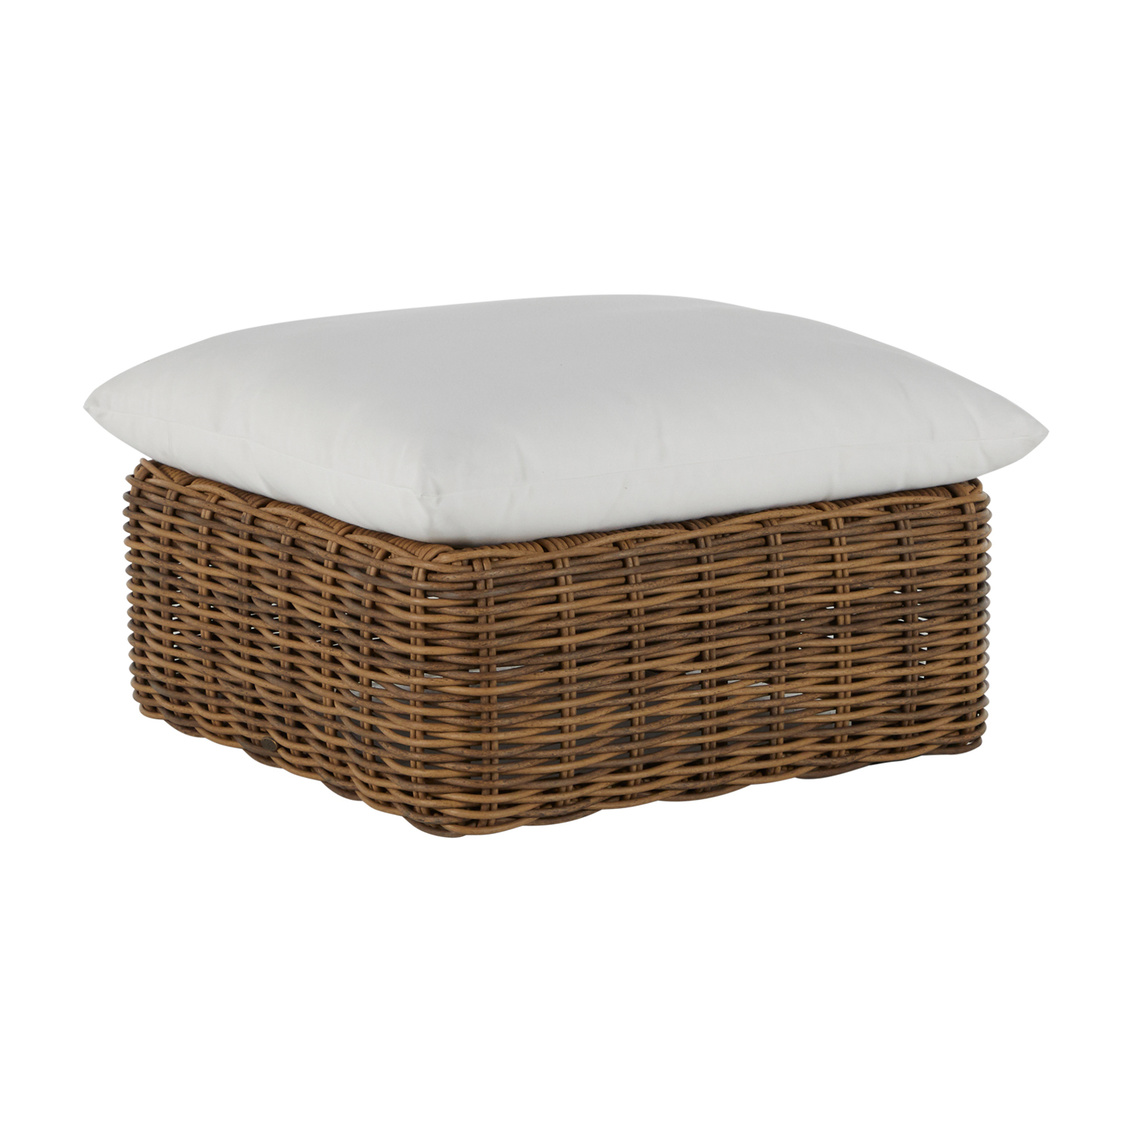 montecito woven ottoman in raffia – frame only product image